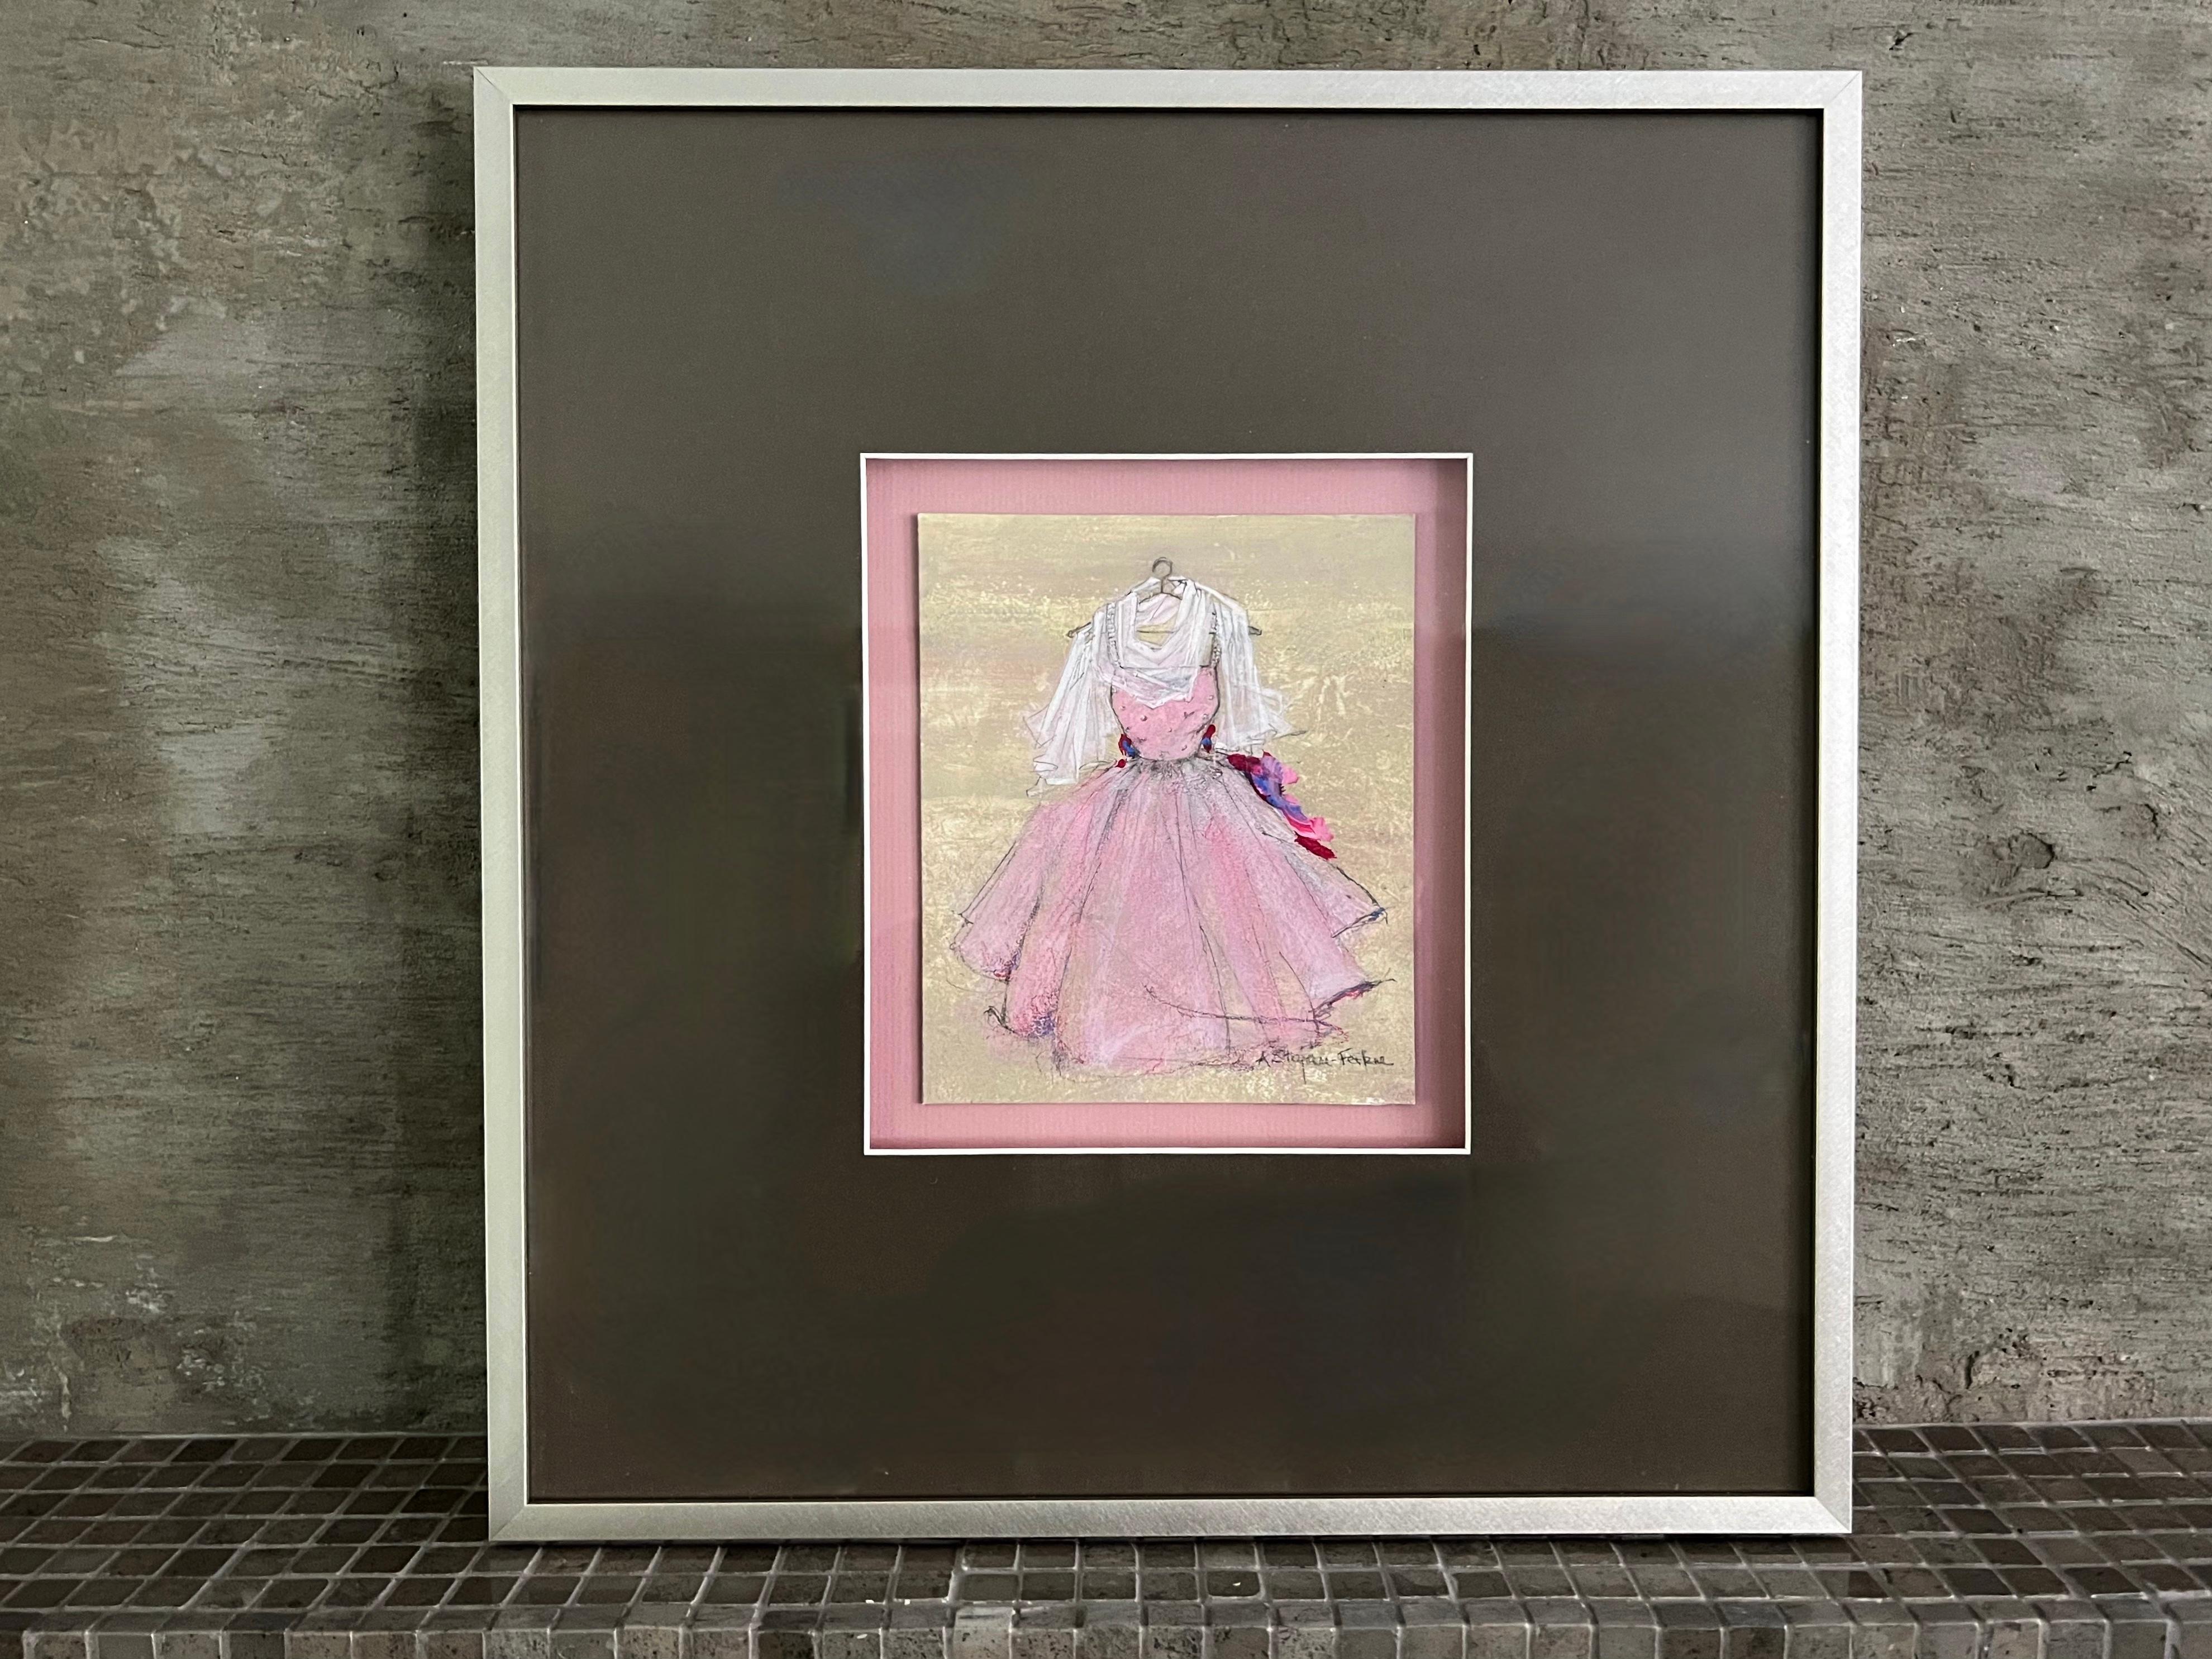 An air of femininity is expressed in this chiffon style dress painting on art board, a nostalgic nod to the graduation, prom or bridesmaid dress. Delicate detail builds up a soft texture over translucent layers of pastel pink. The combination of